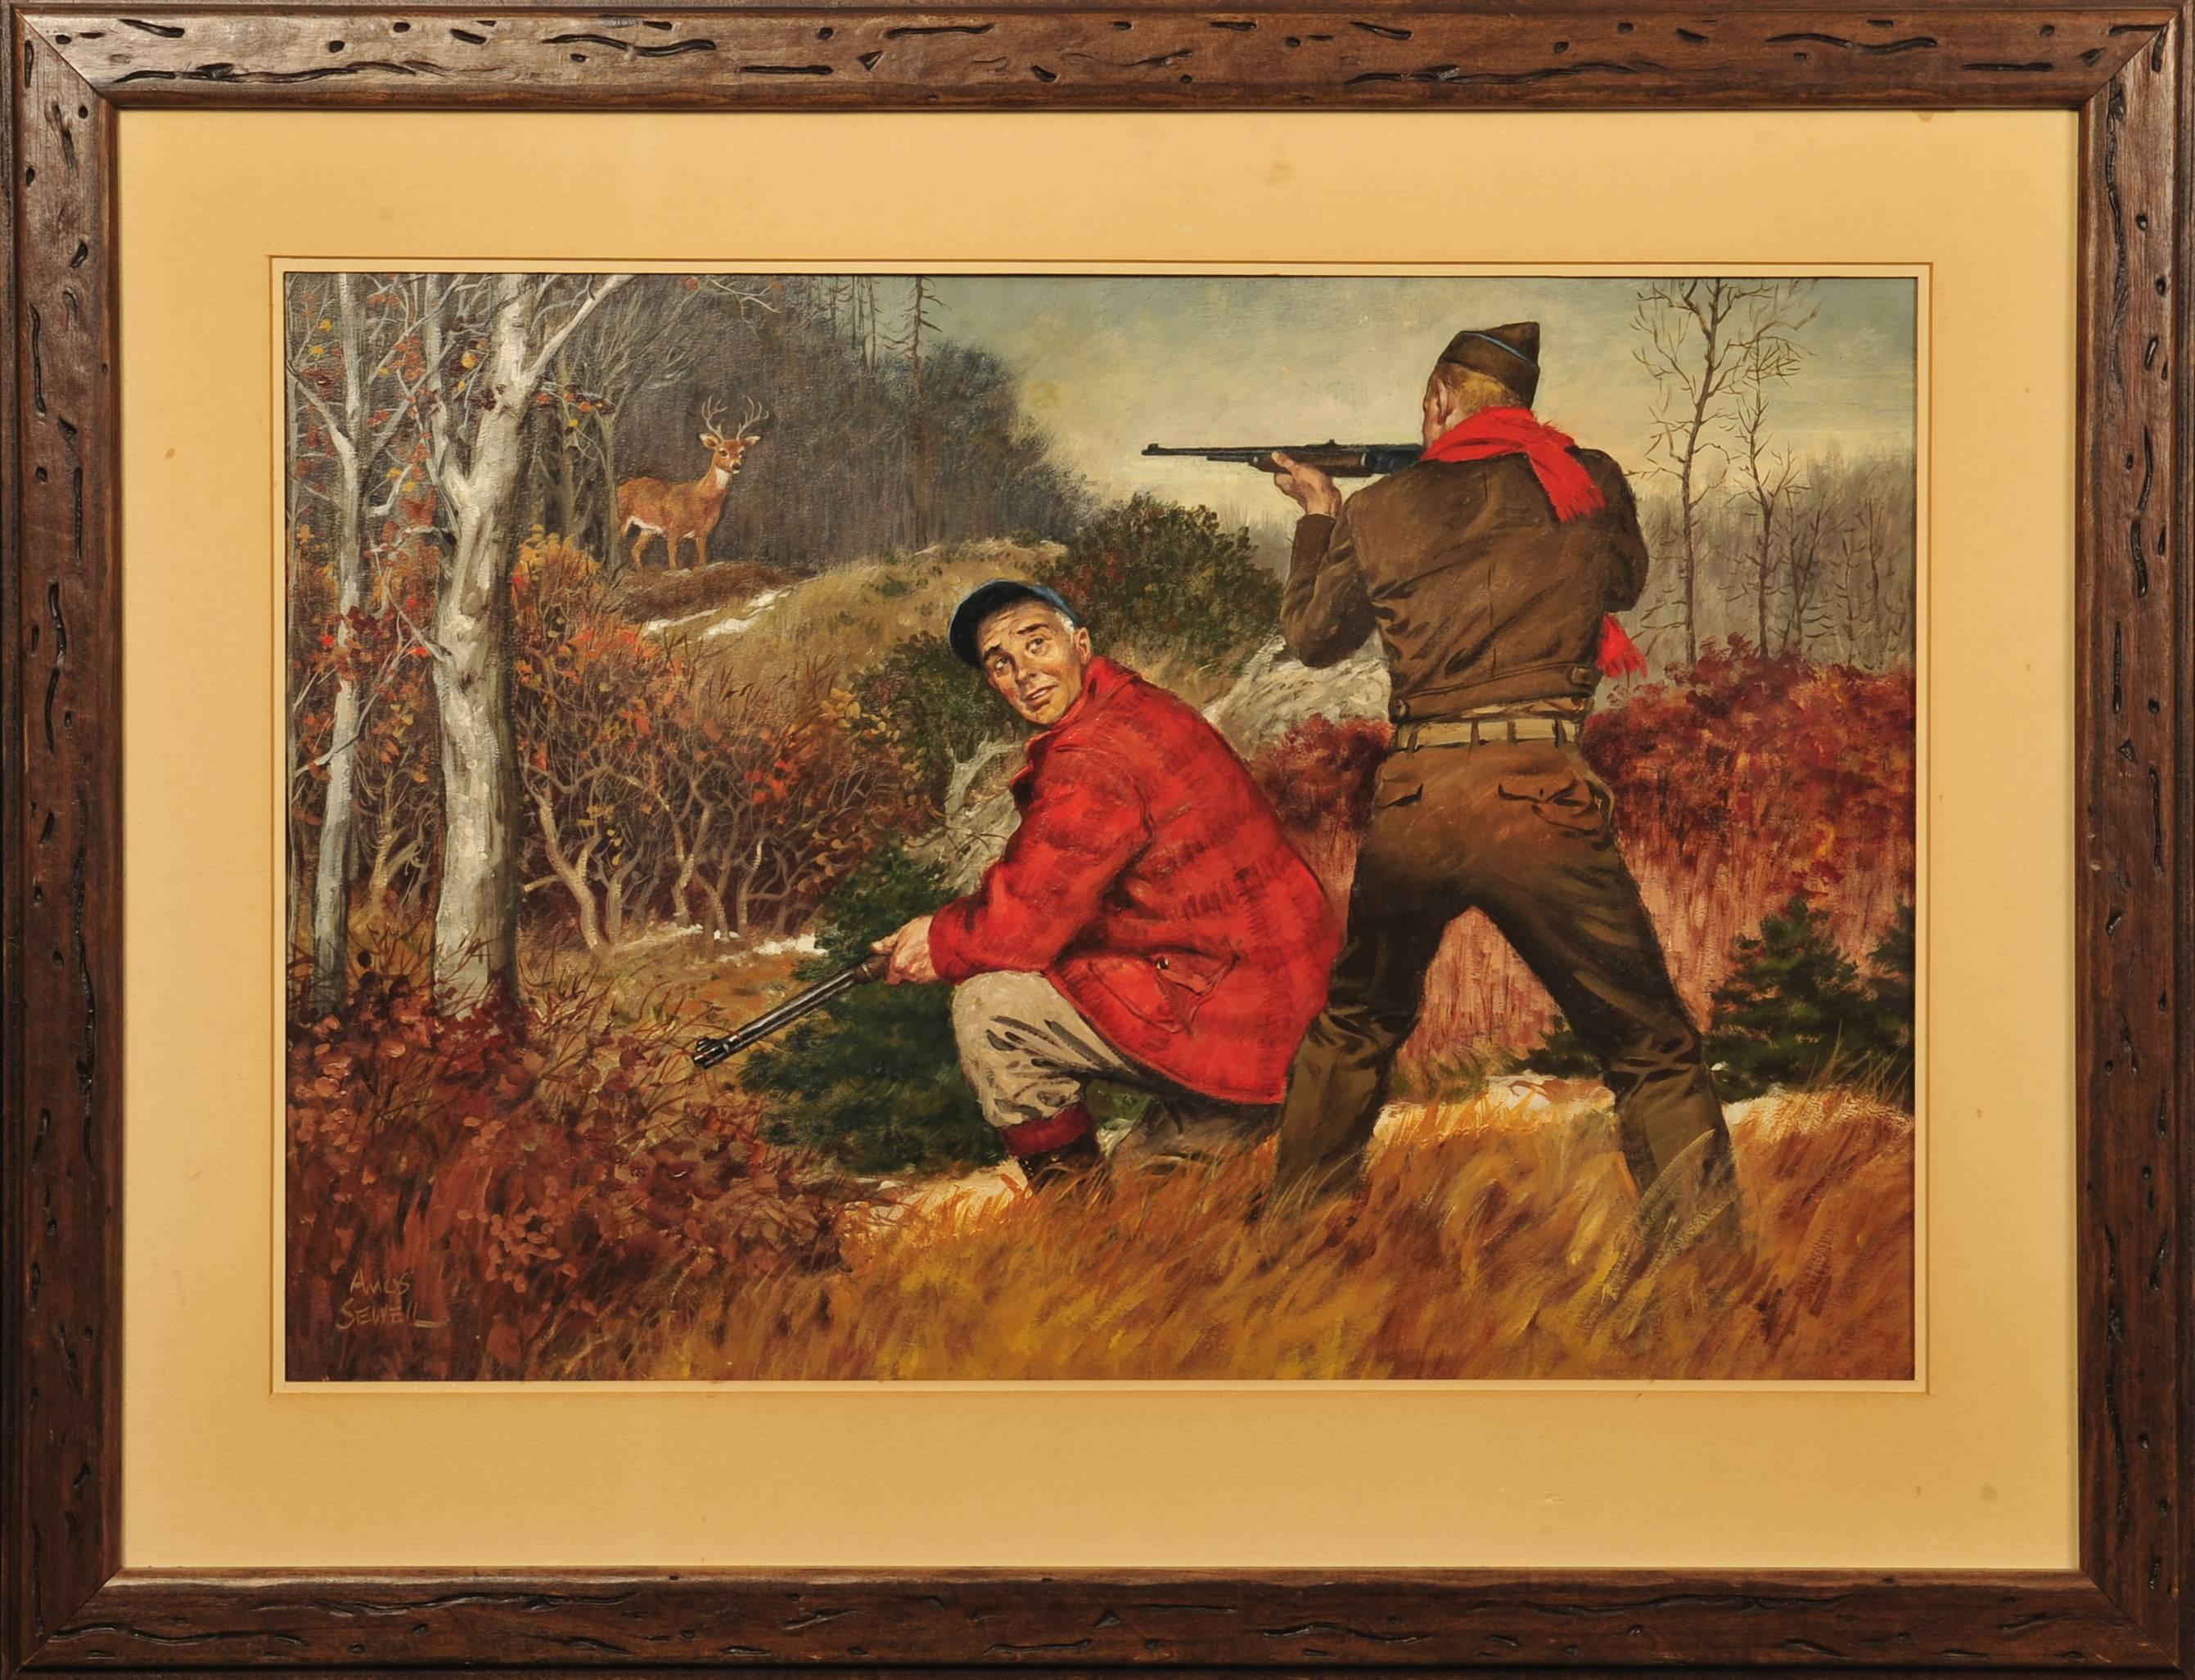 Soldier and Hunter - Painting by Amos Sewell